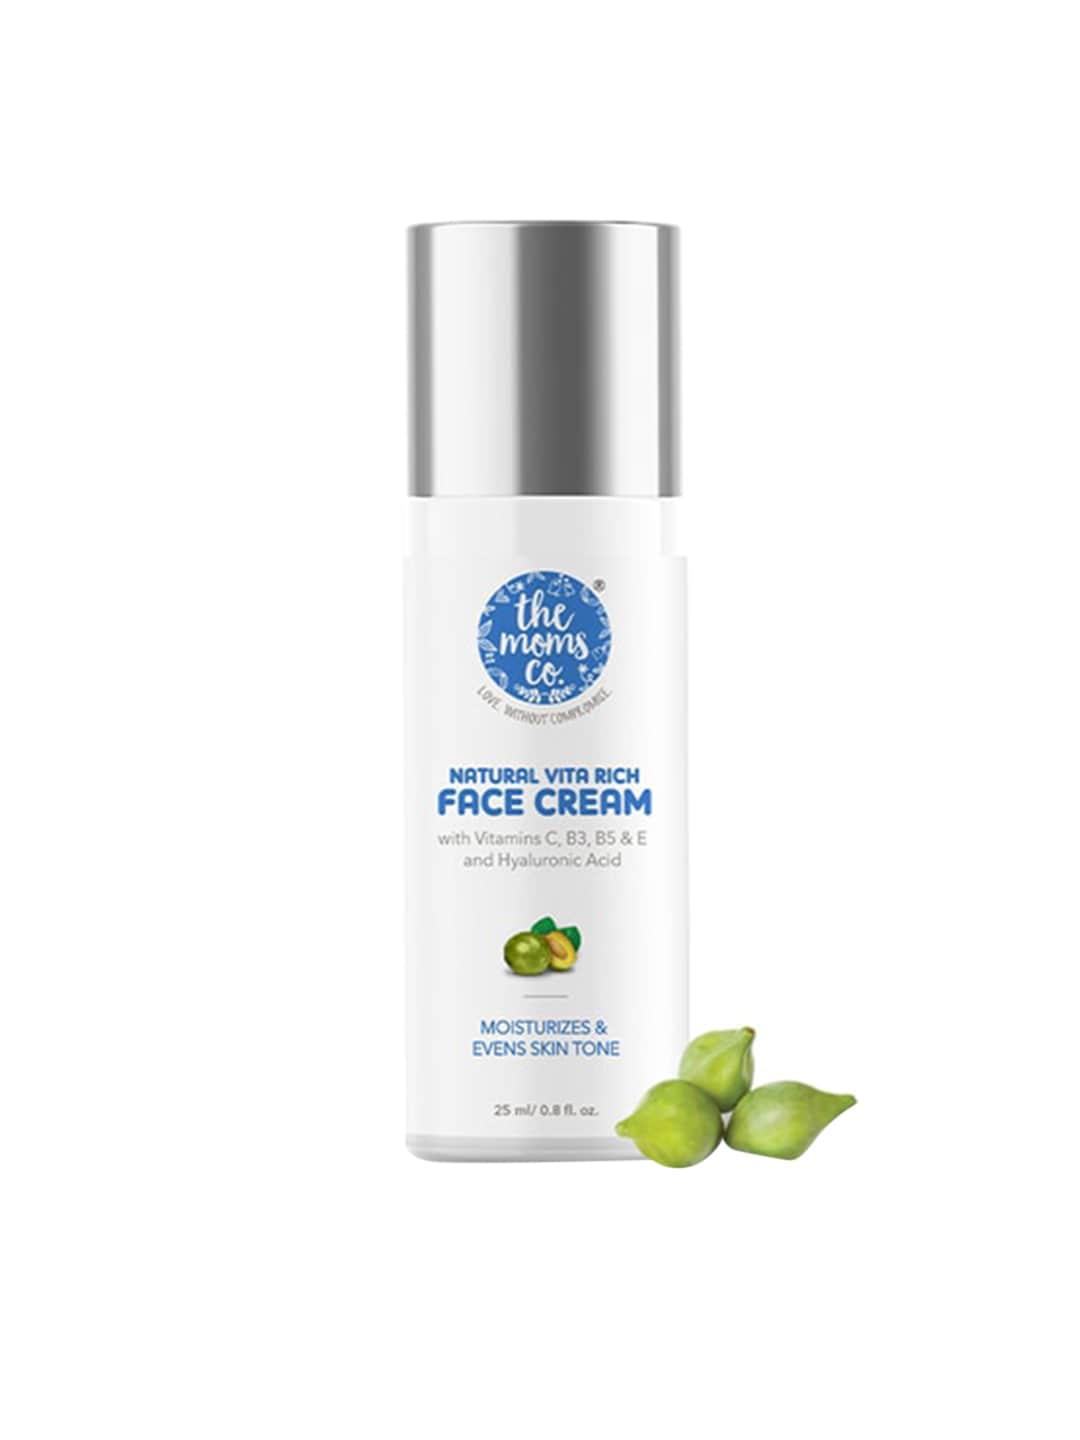 The Moms Co. Natural Vita Rich Face Cream with Vitamin C & Hyaluronic Acid - 25 ml